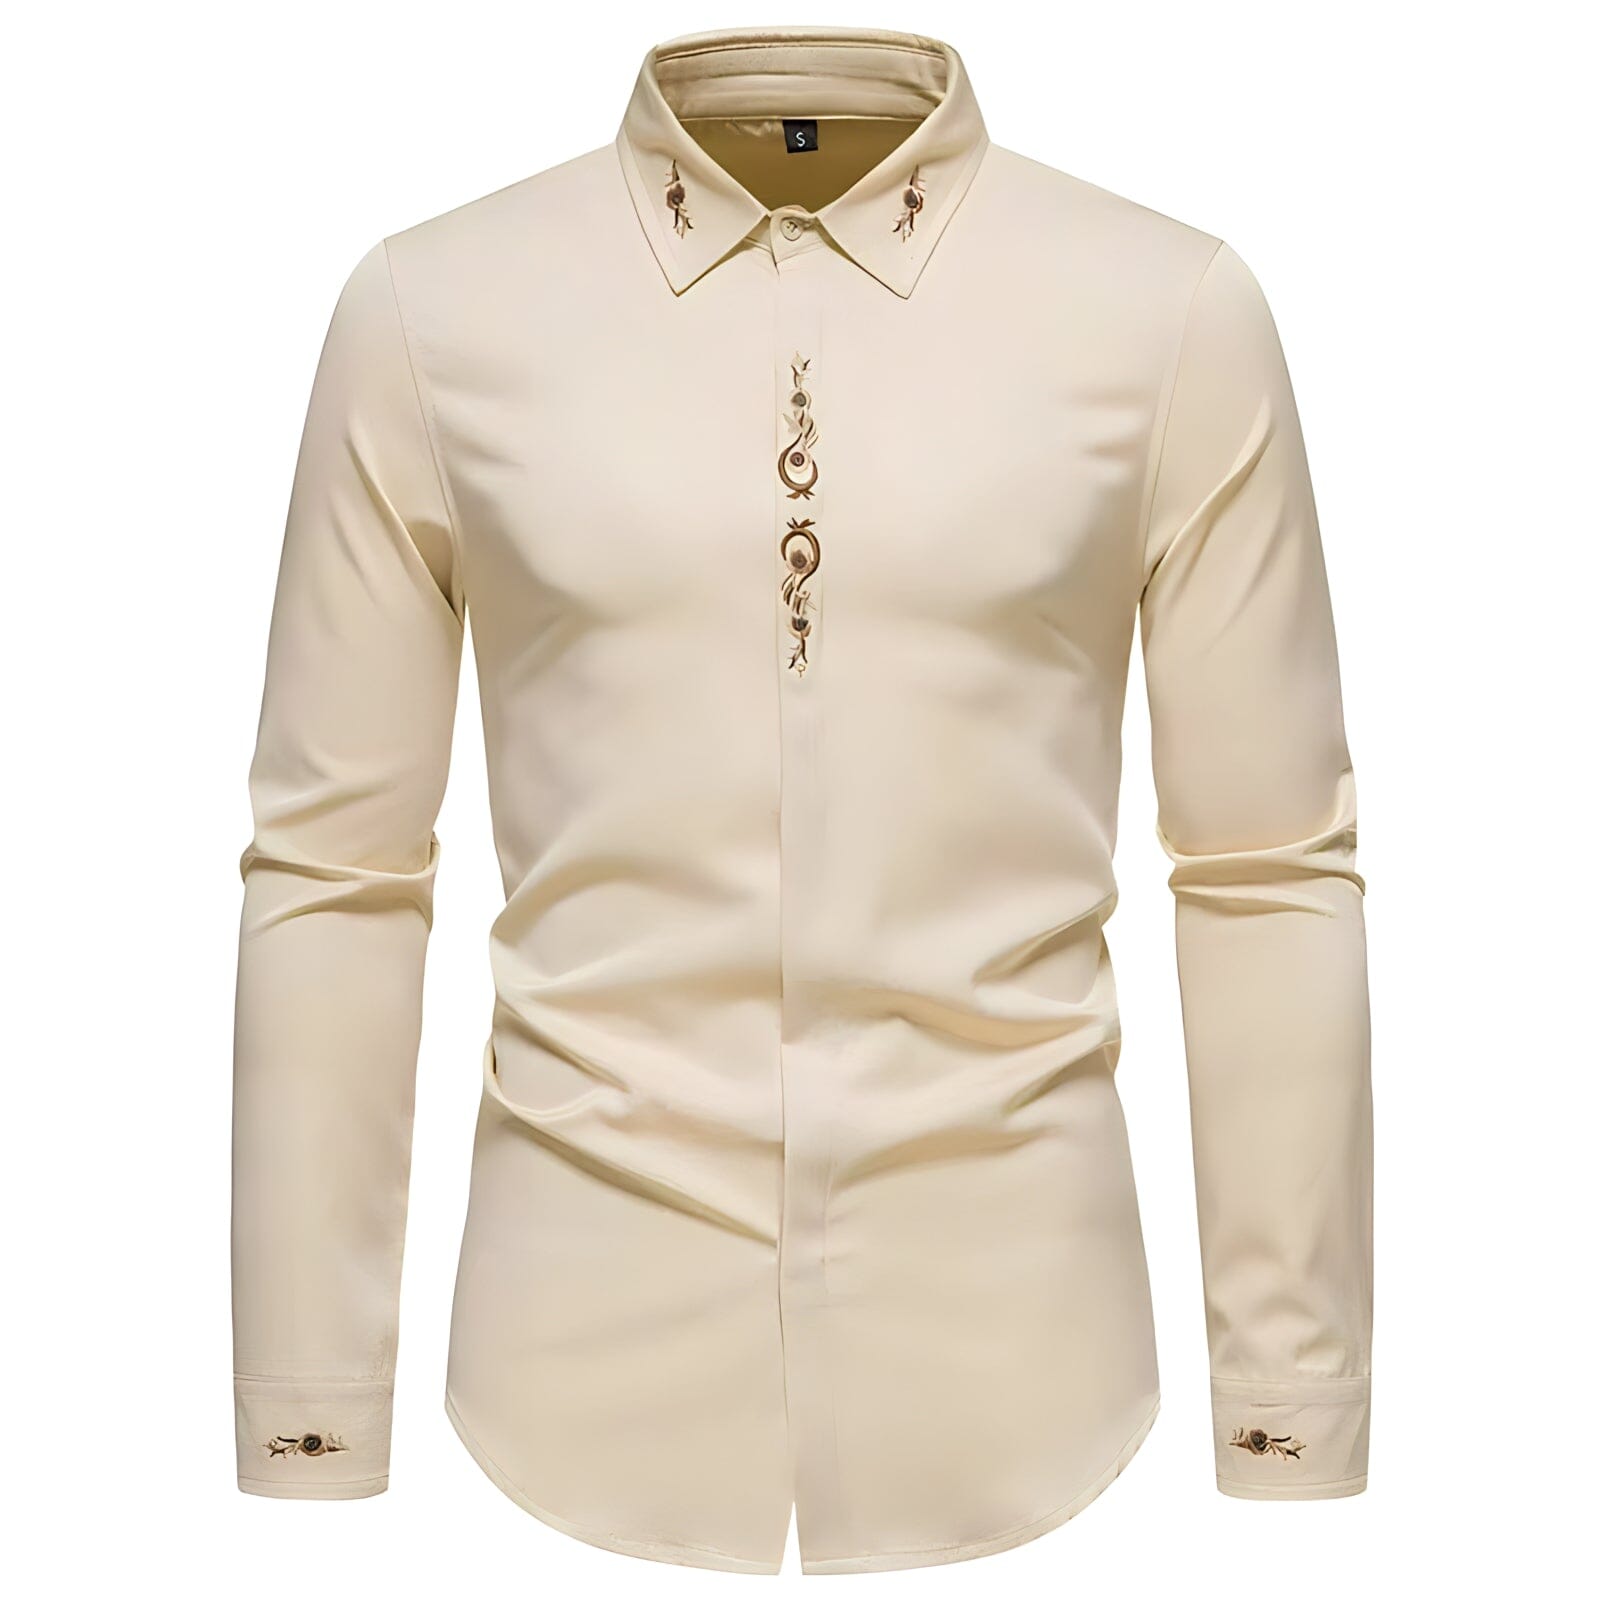 The Terrace Embroidered Long Sleeve Shirt - Multiple Colors WD Styles Cream S 